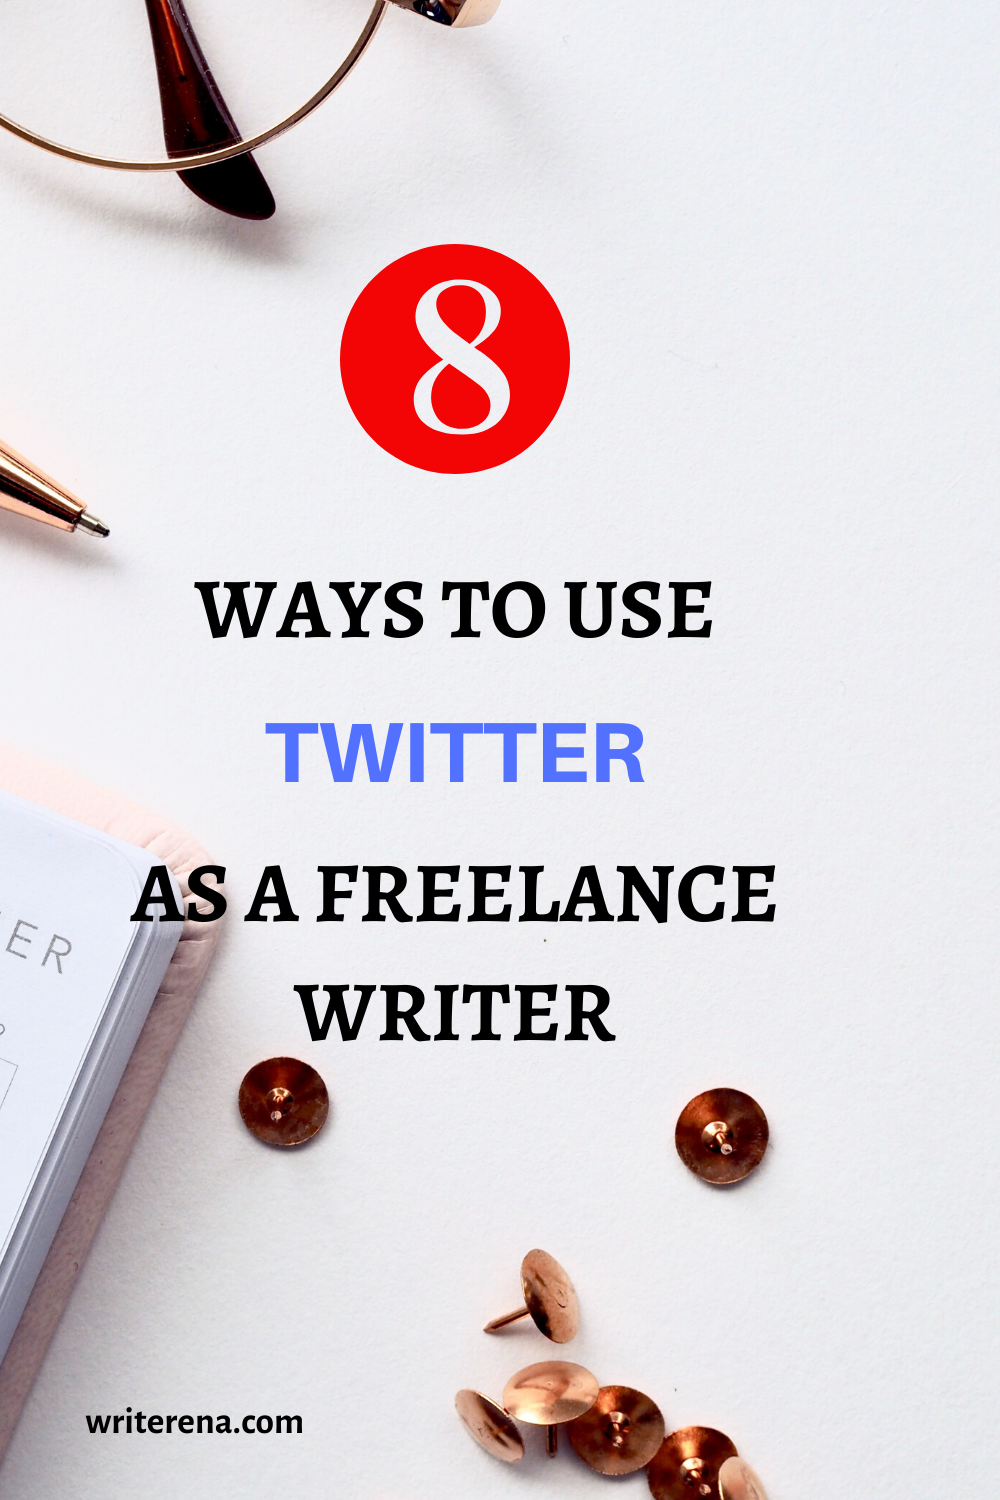 how-to-use-twitter-as-freelance-writer